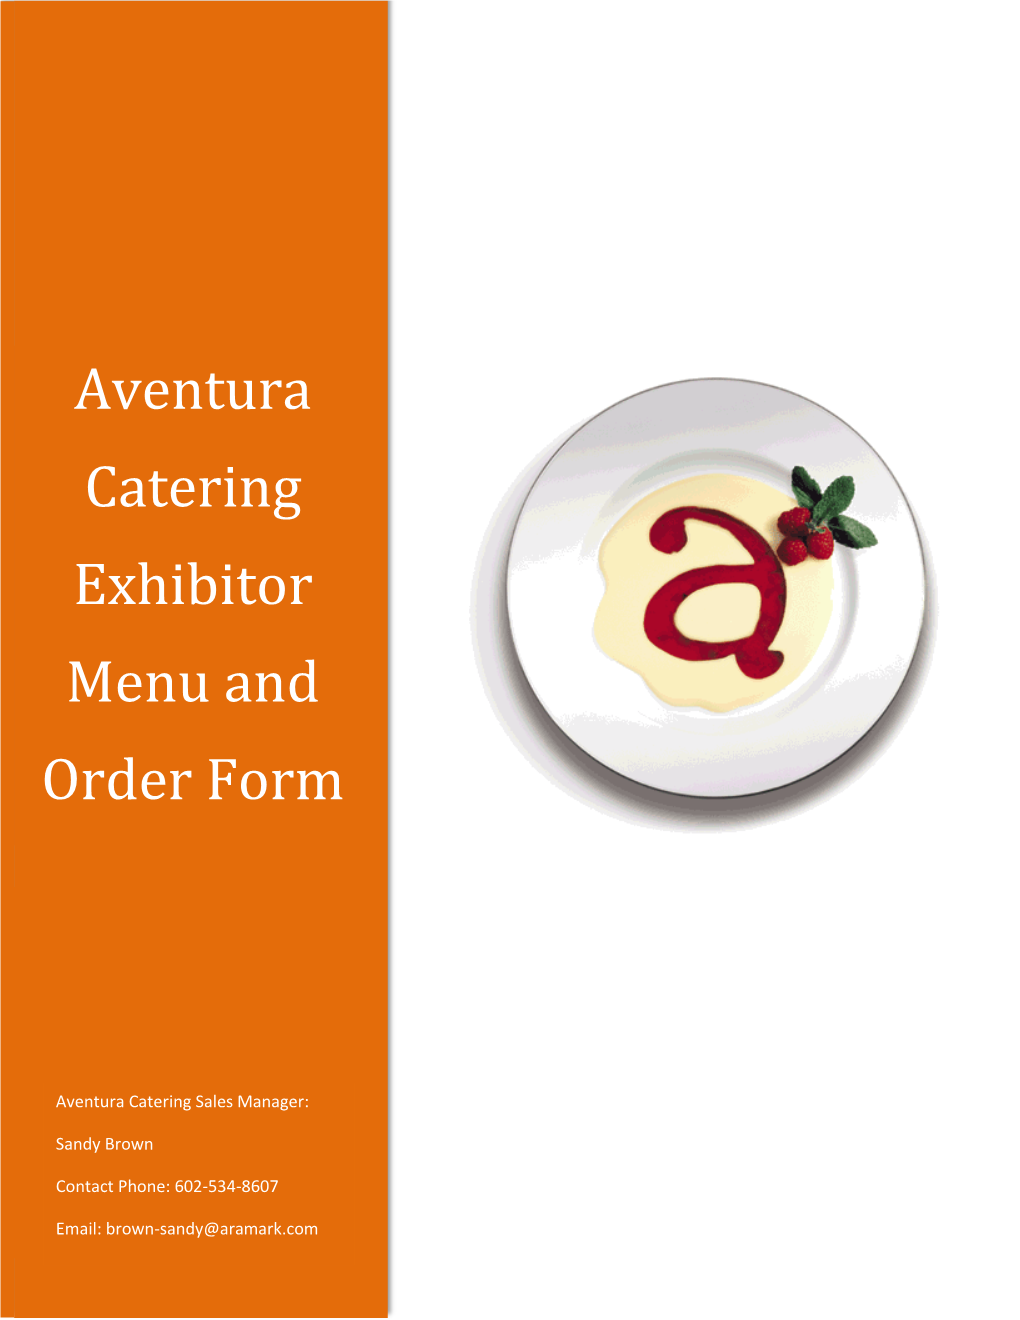 Aventura Catering Exhibitor Menu and Order Form